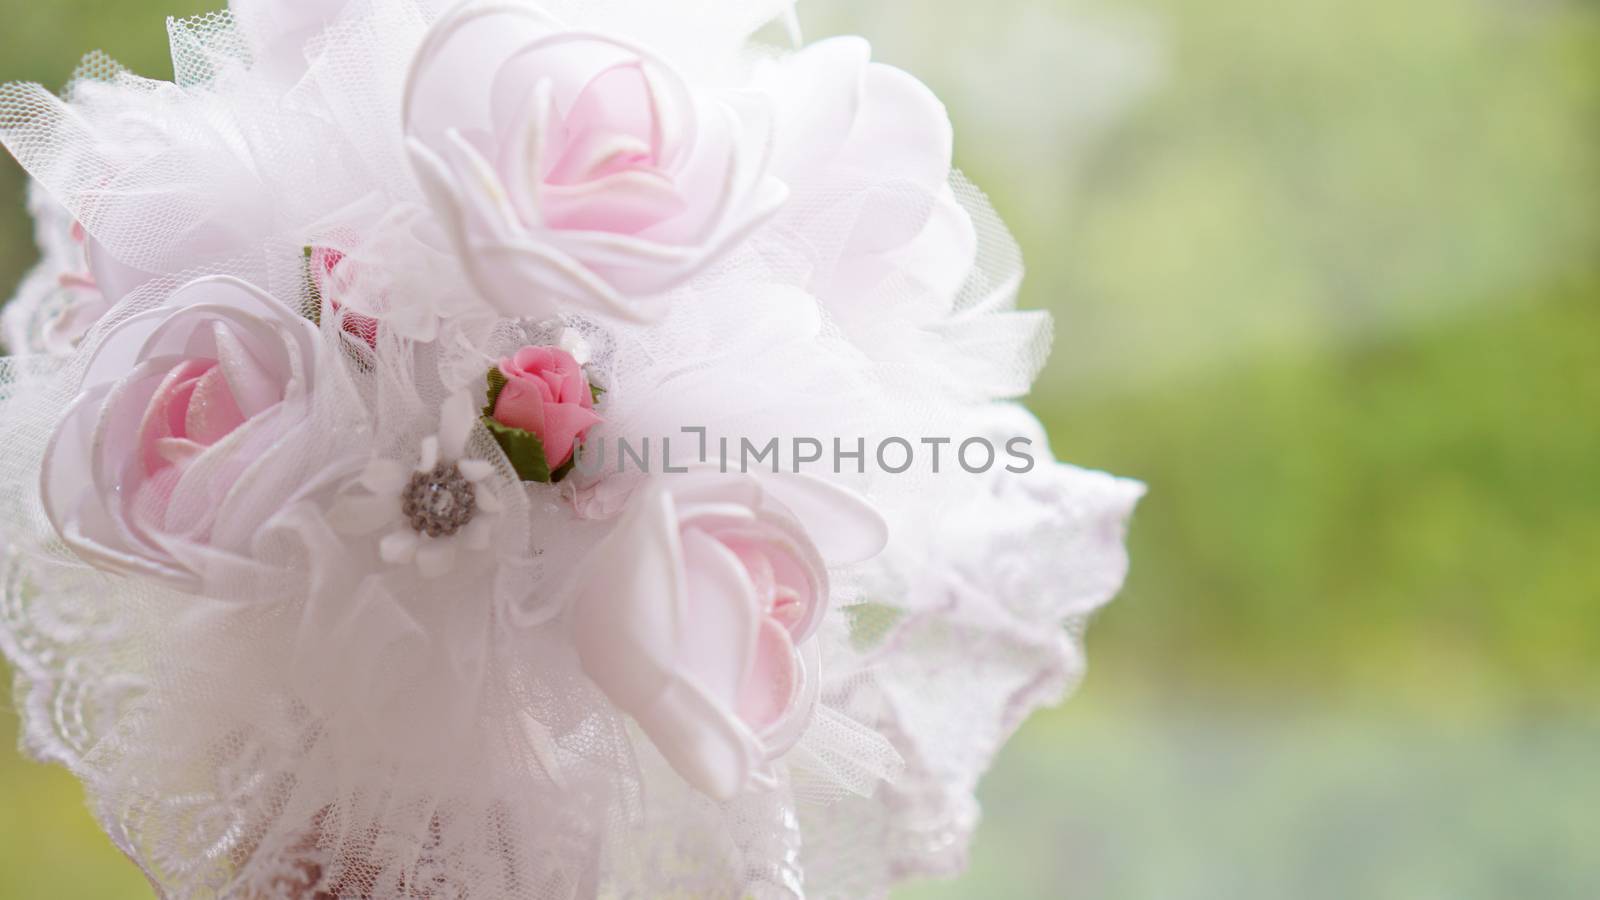 Wedding bouquet made of white roses by natali_brill